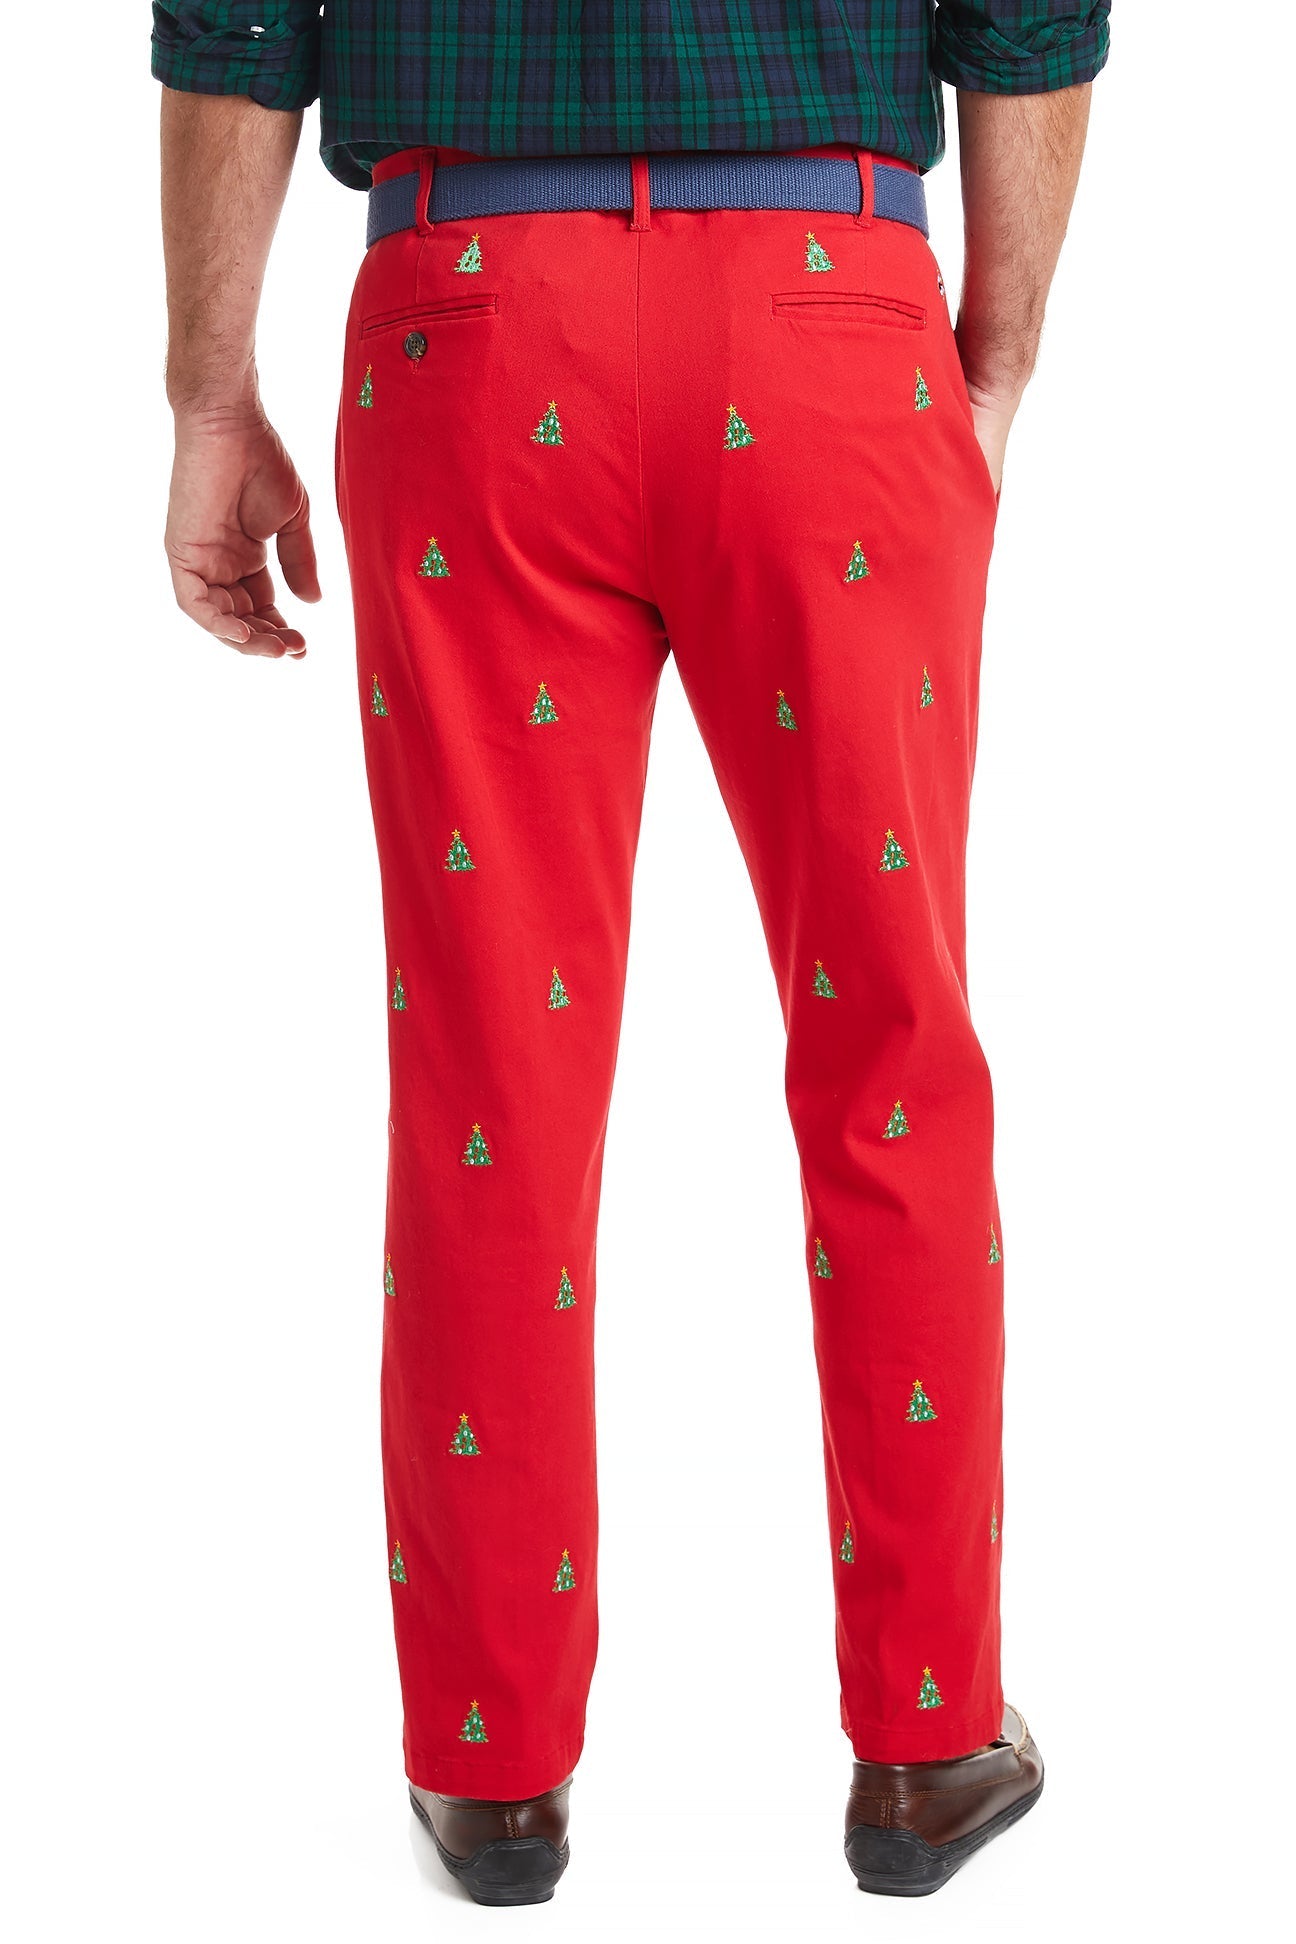 Harbor Pant Stretch Twill Bright Red with Christmas Tree Pants Castaway Nantucket Island